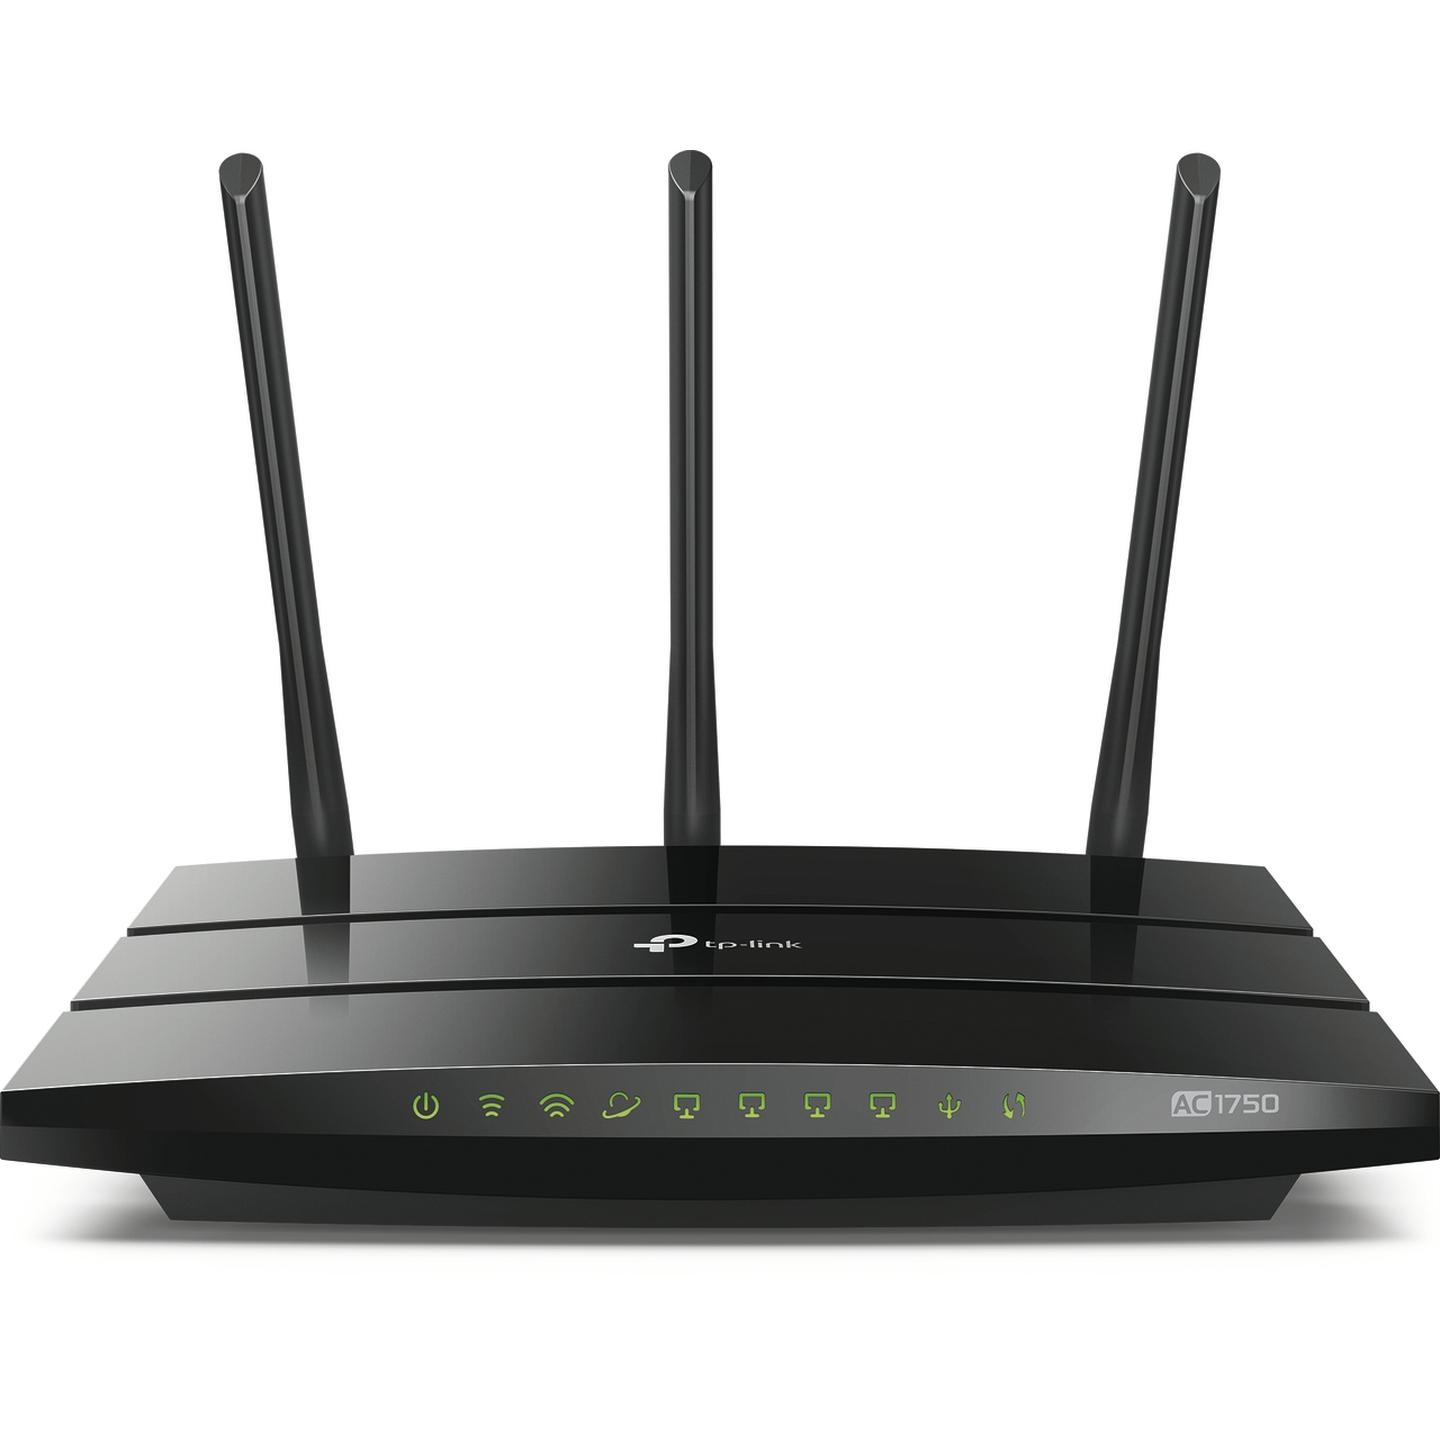 TP-Link AC1750 Dual Band Gigiabit Router